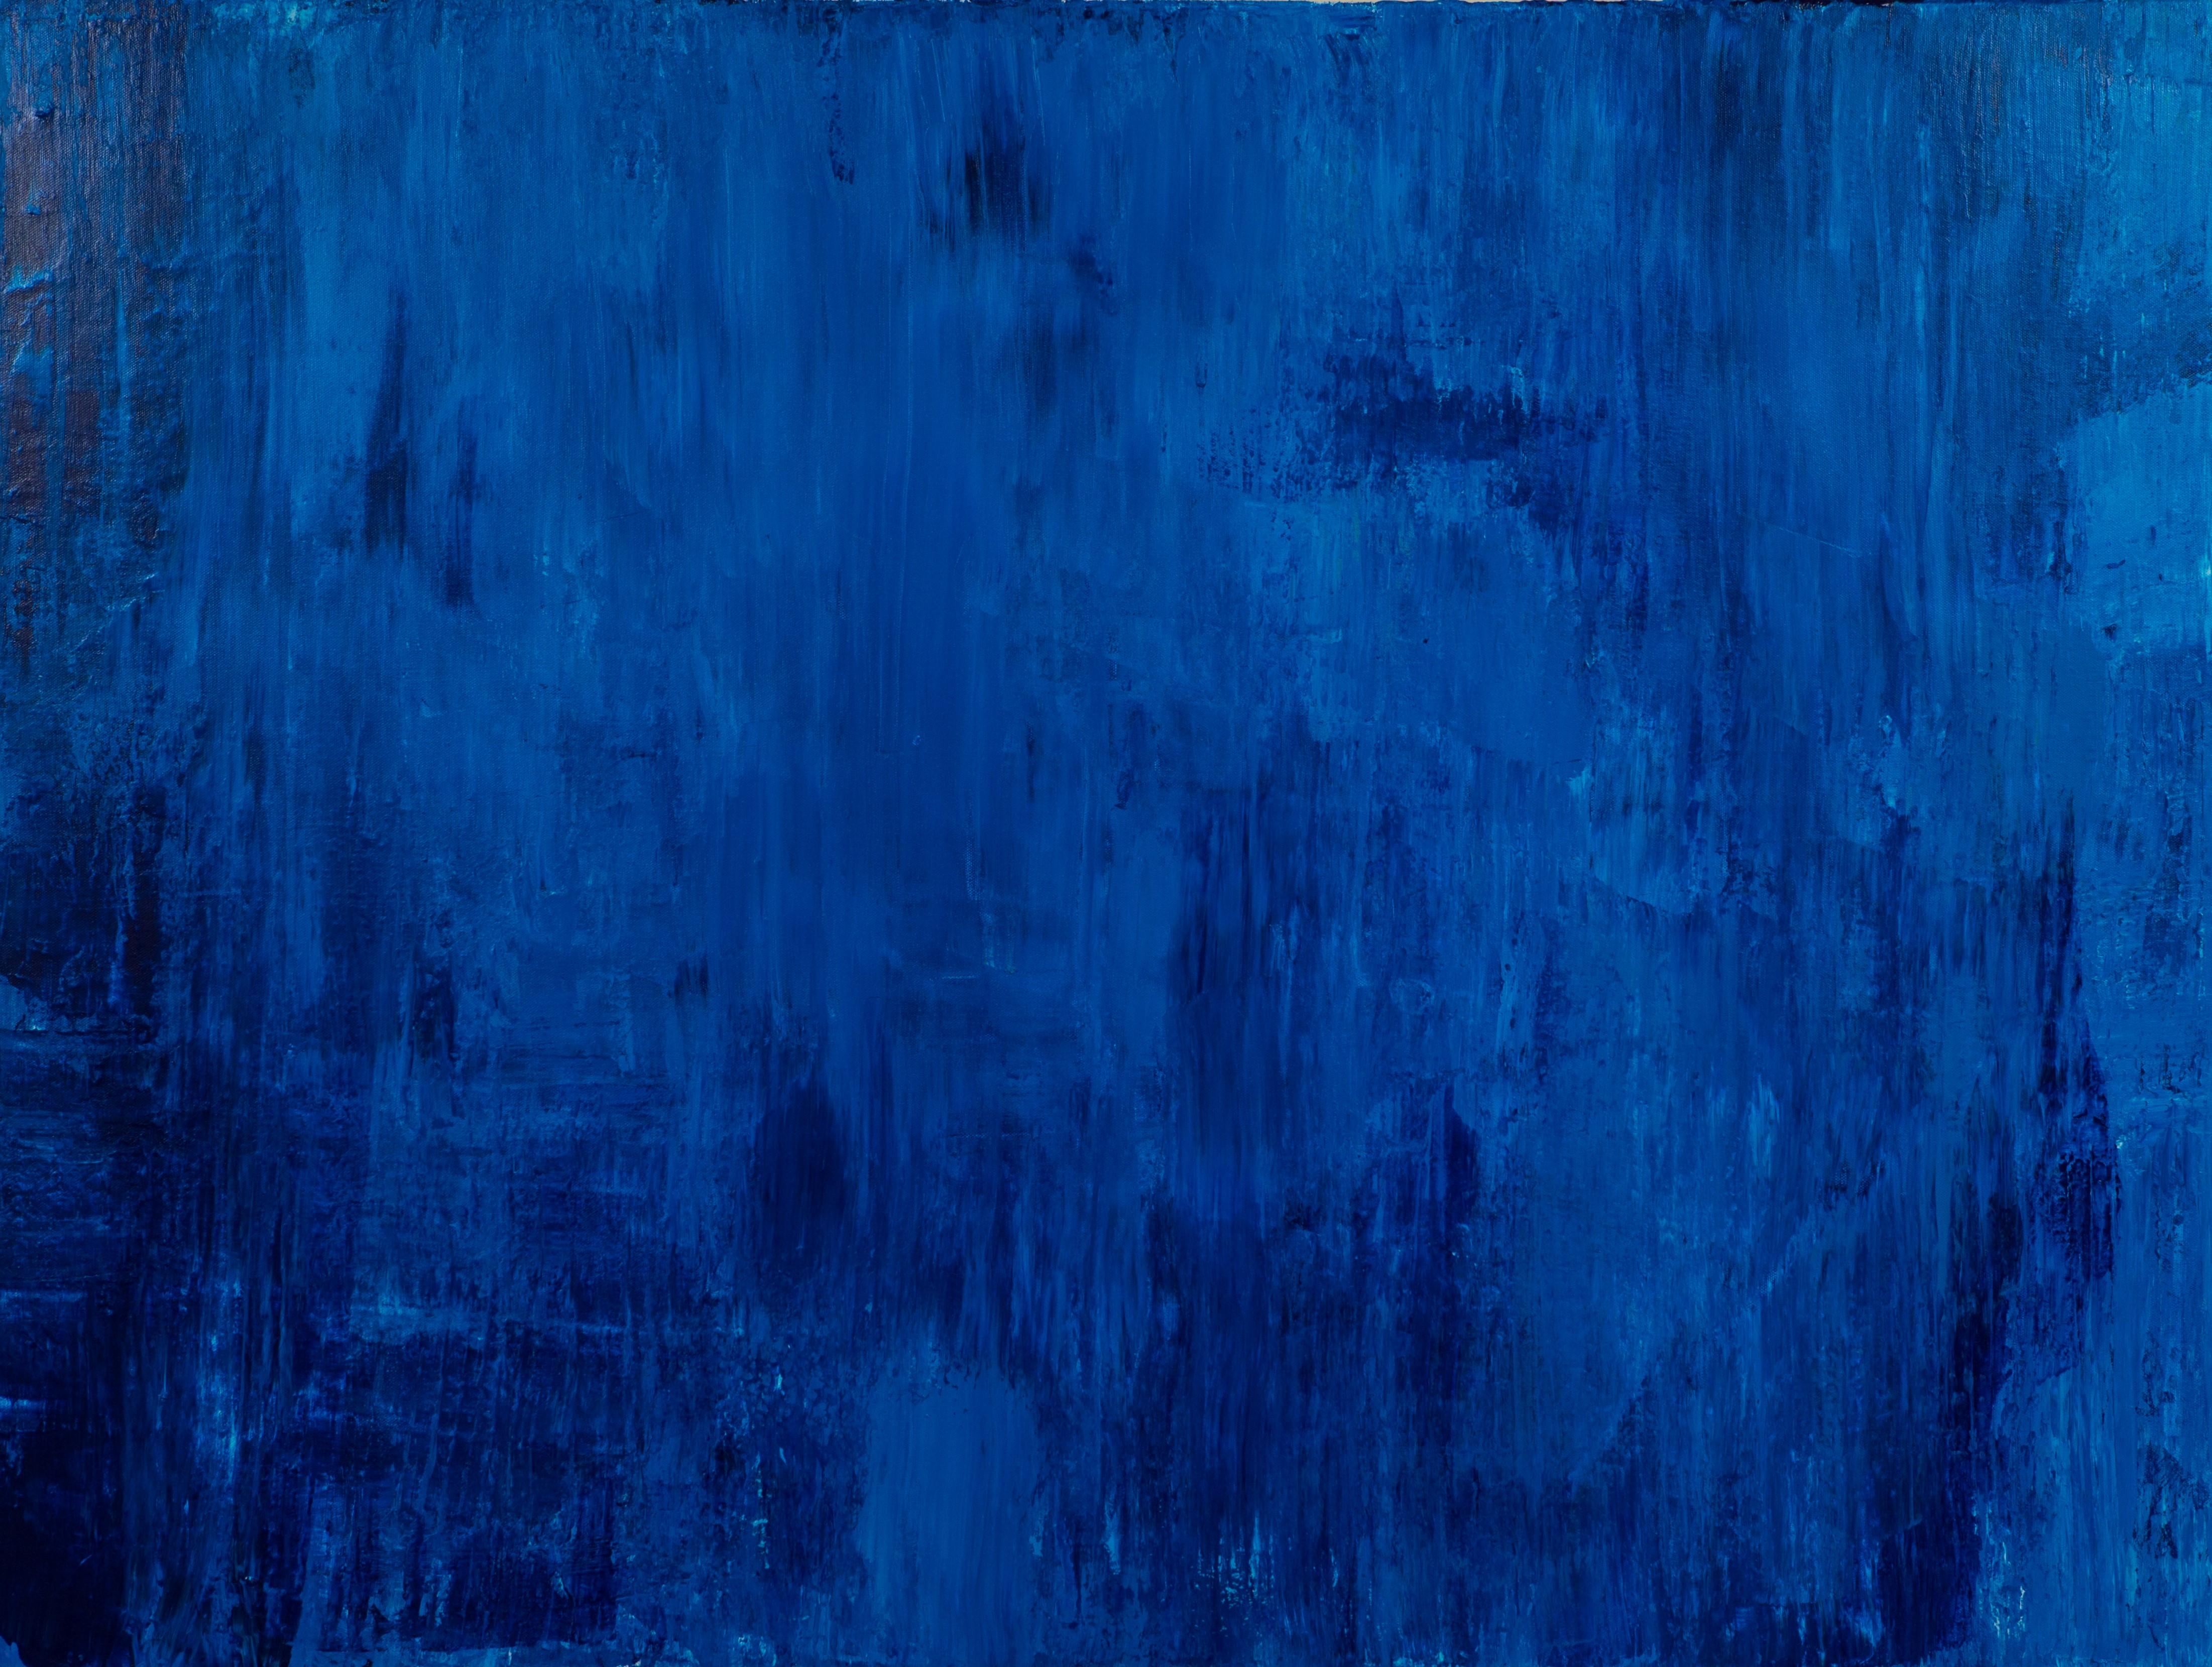 Bonnie Star Abstract Painting - Meditation On Blue, abstract layered blue painting